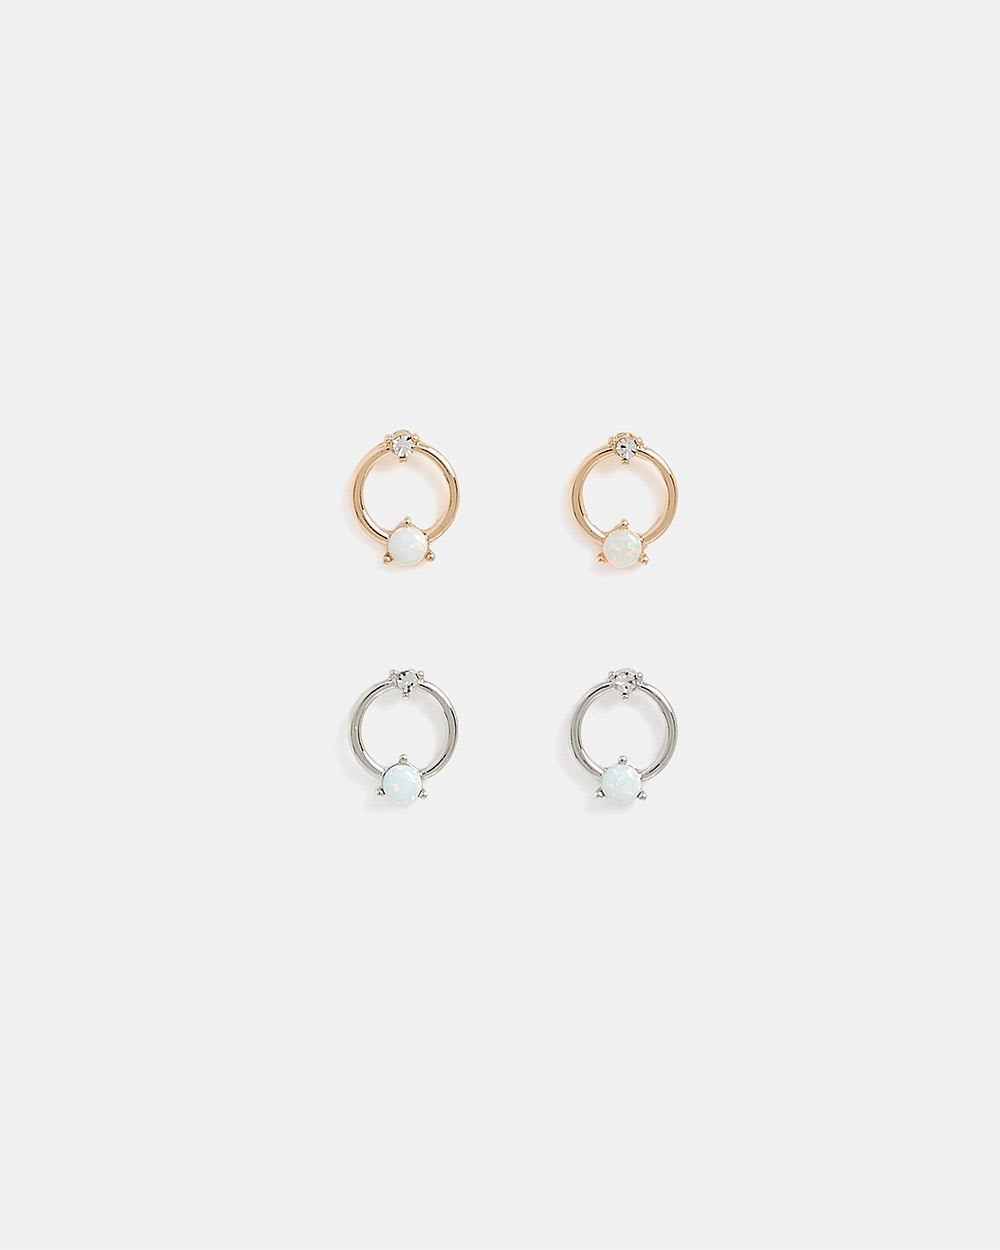 Small Circle Stud Earrings with Delicate Stone - 2 Pairs